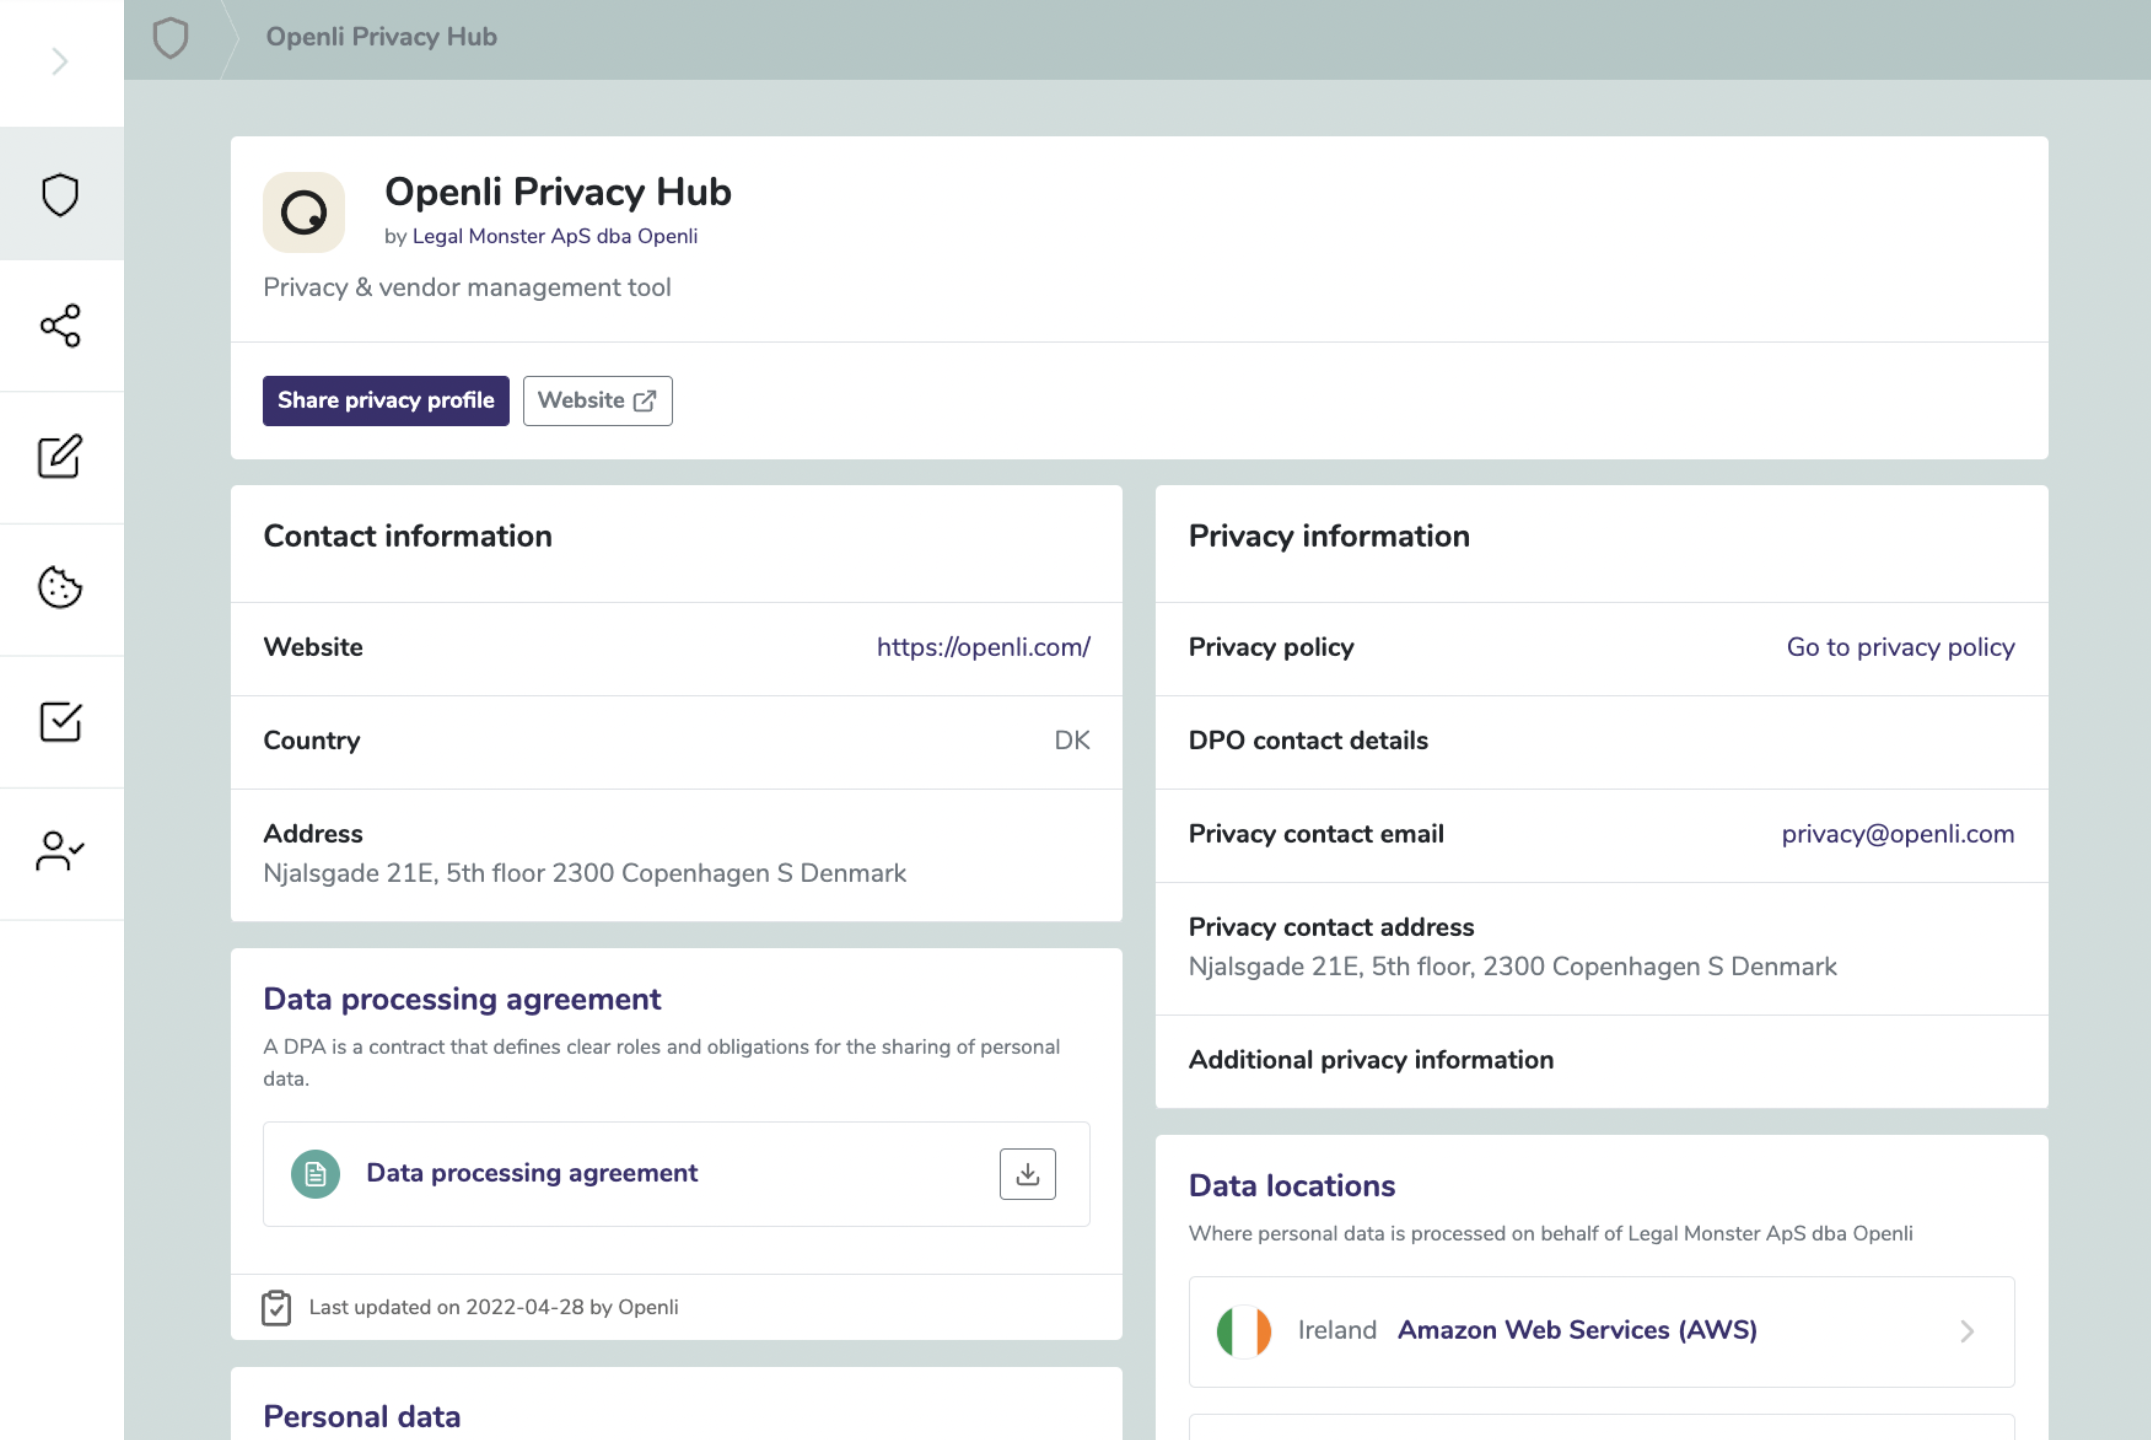 Shareable Privacy Profile